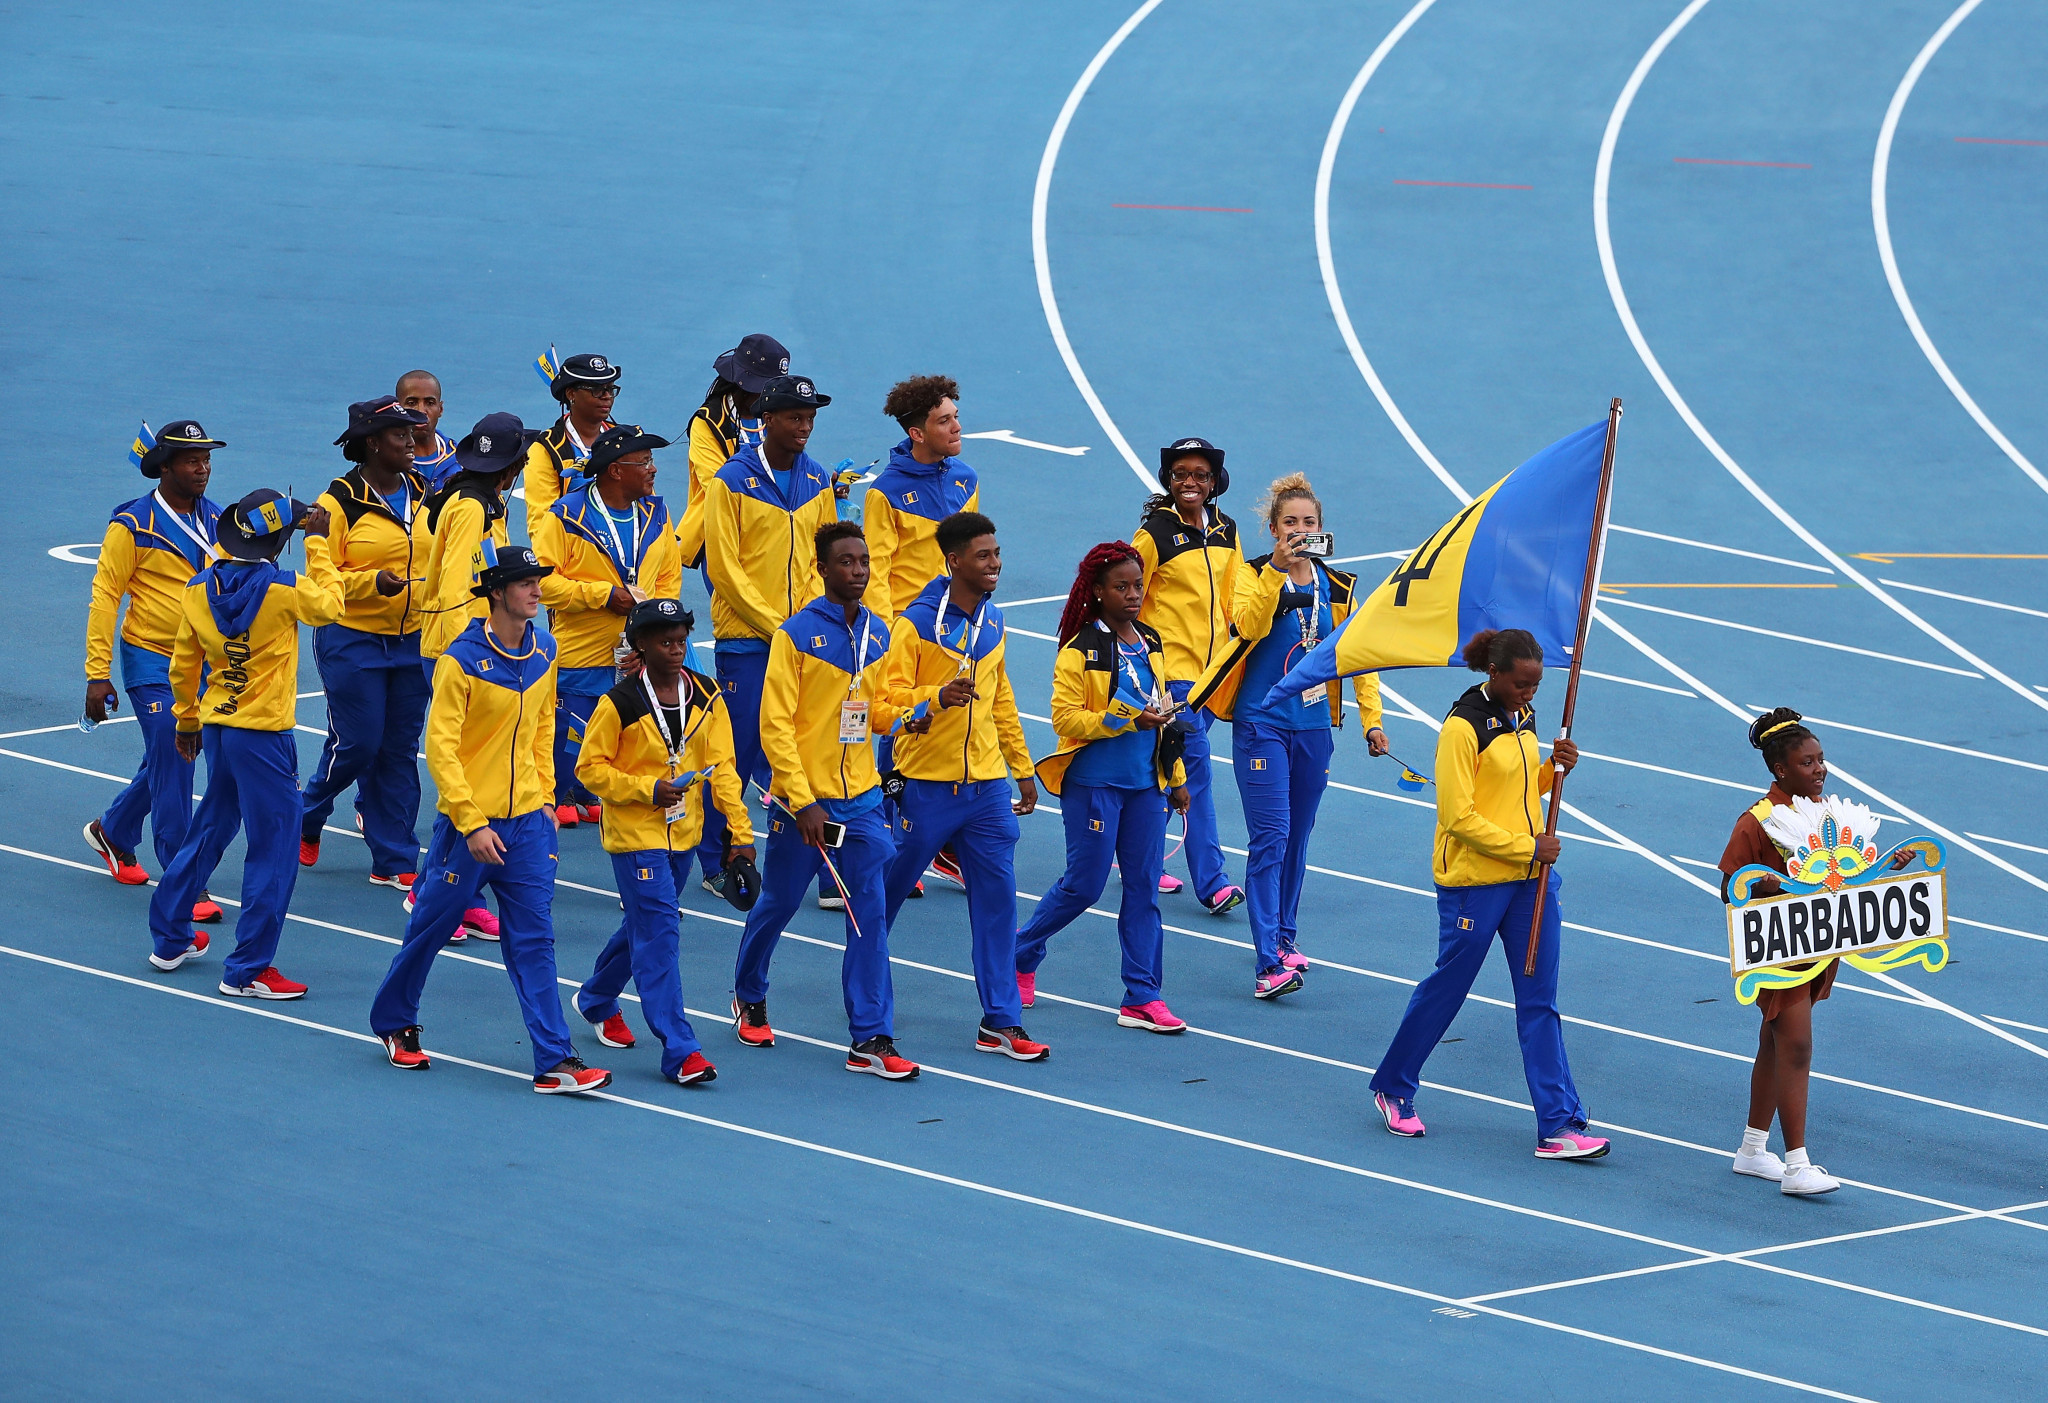 Barbados to hold leadership workshop with young athletes in August